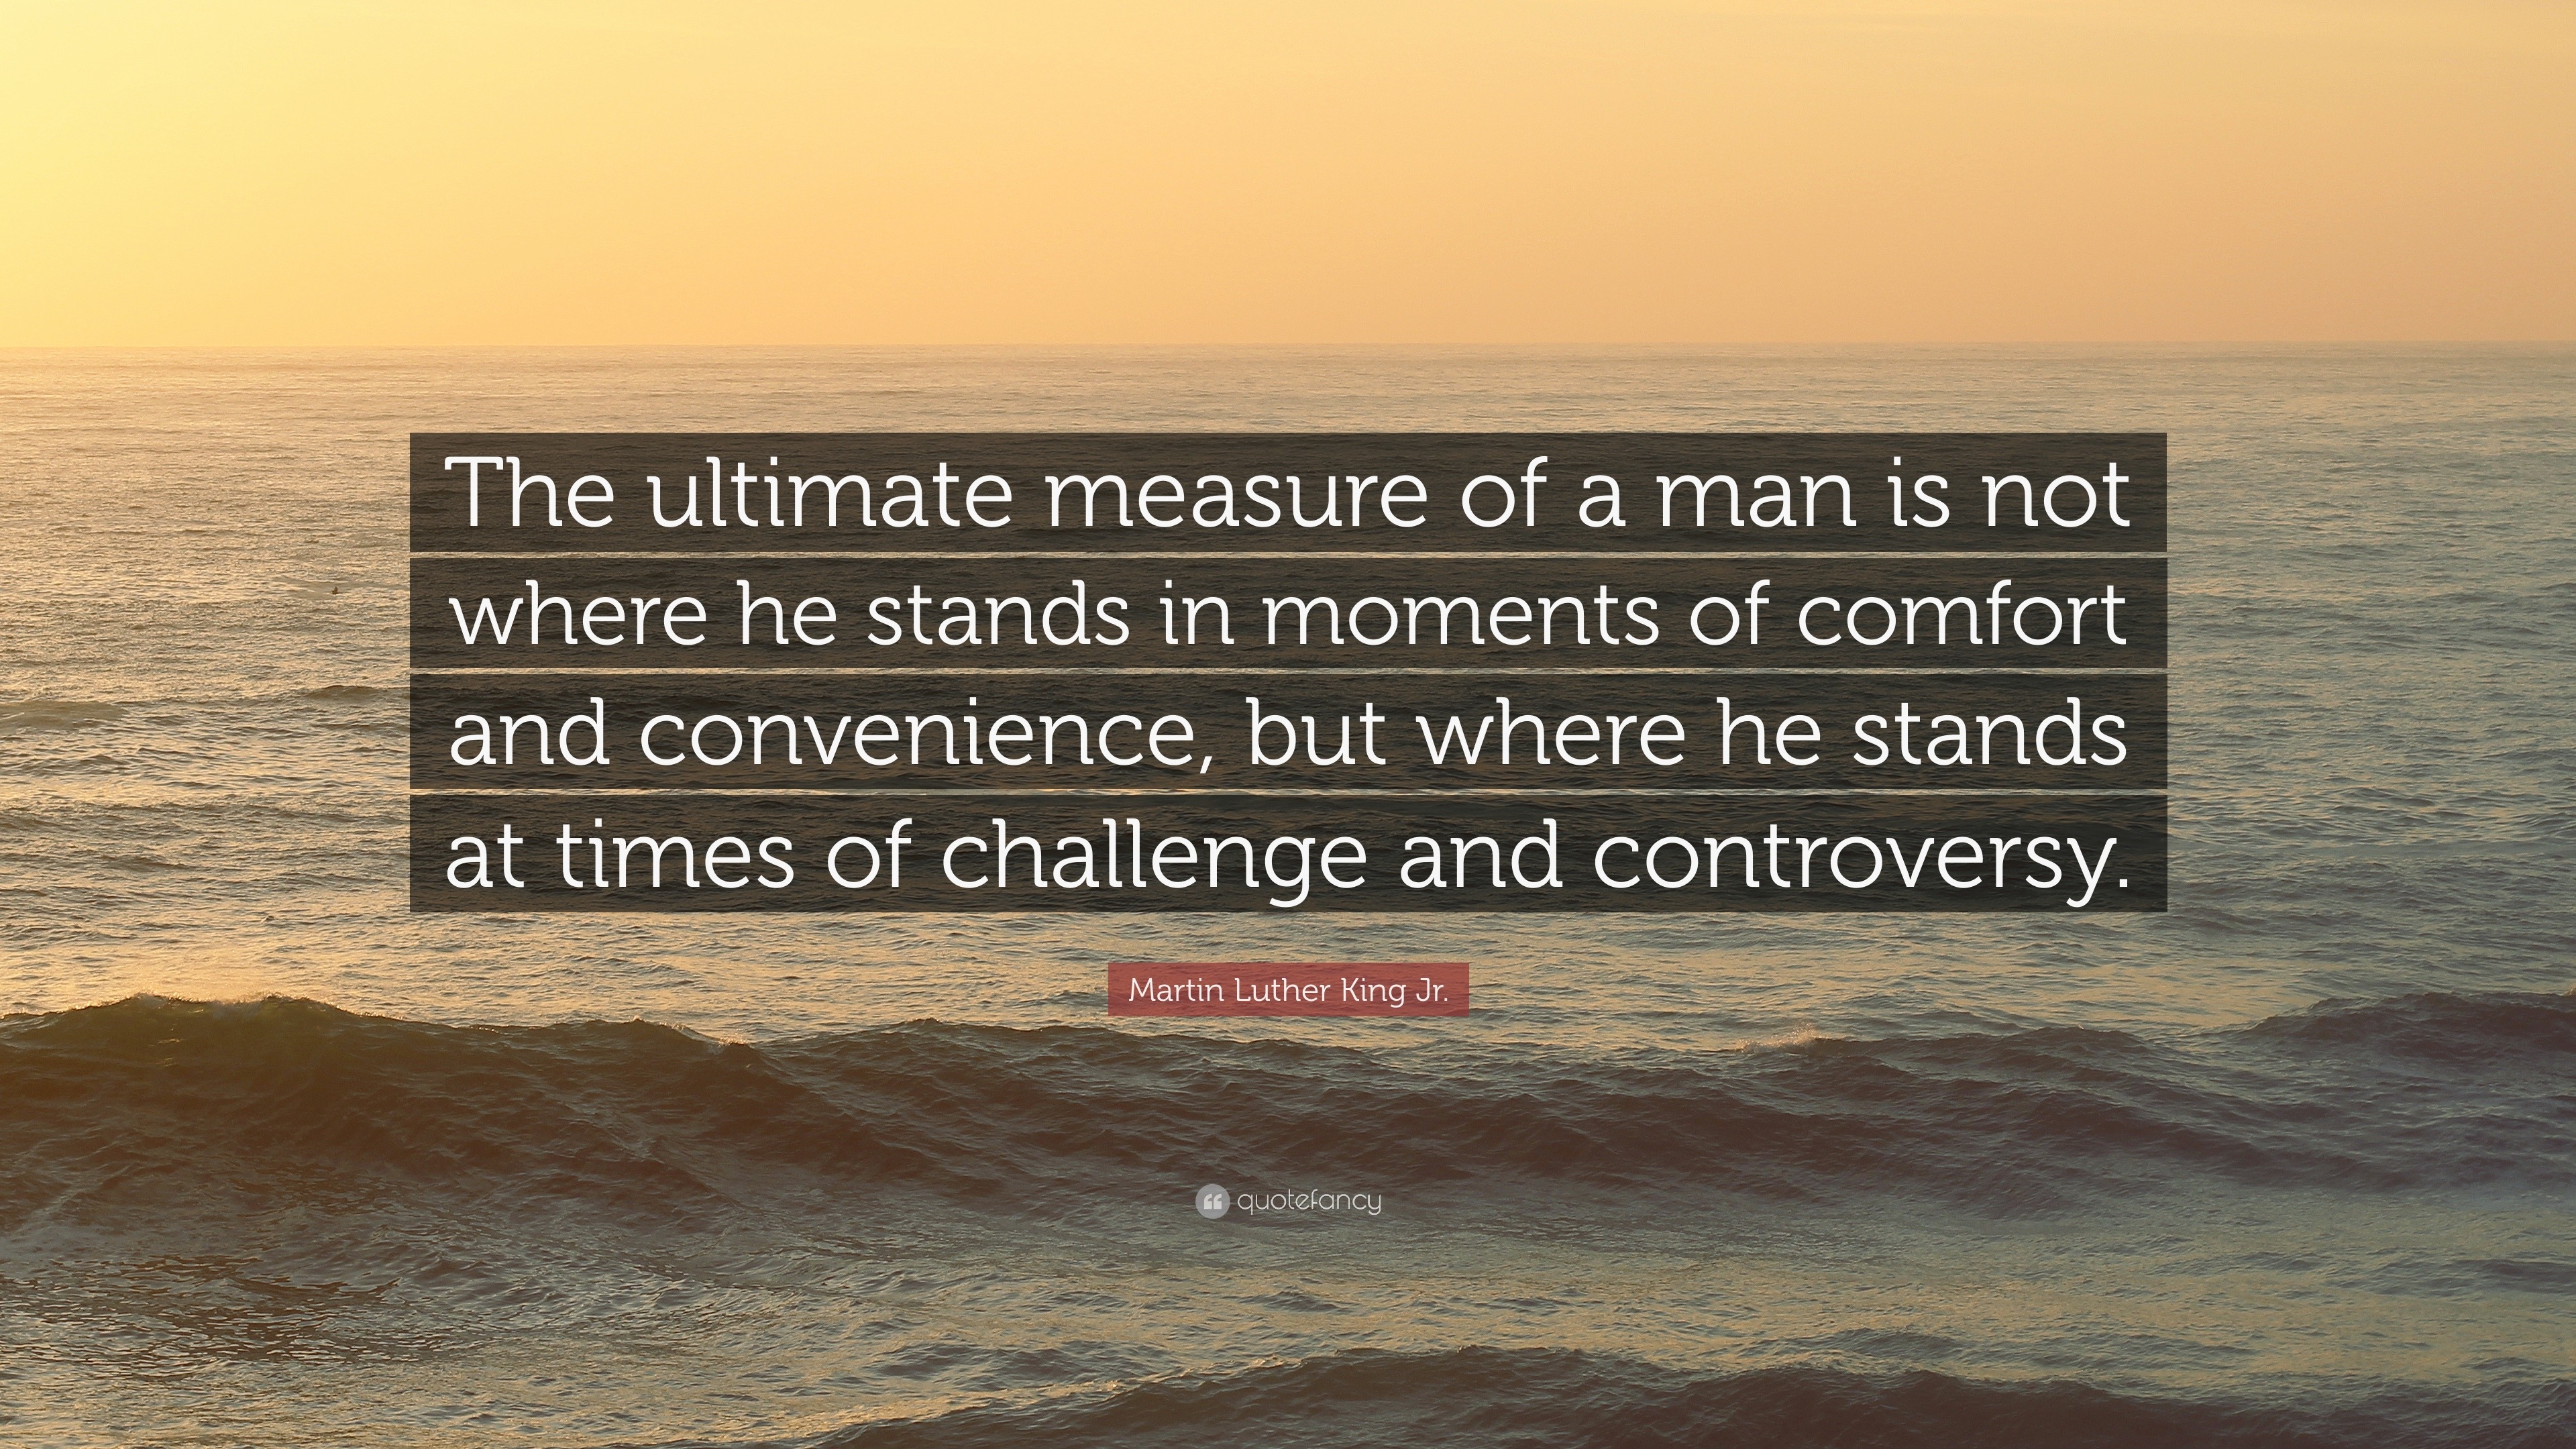 Martin Luther King Jr. Quote: “The ultimate measure of a man is not